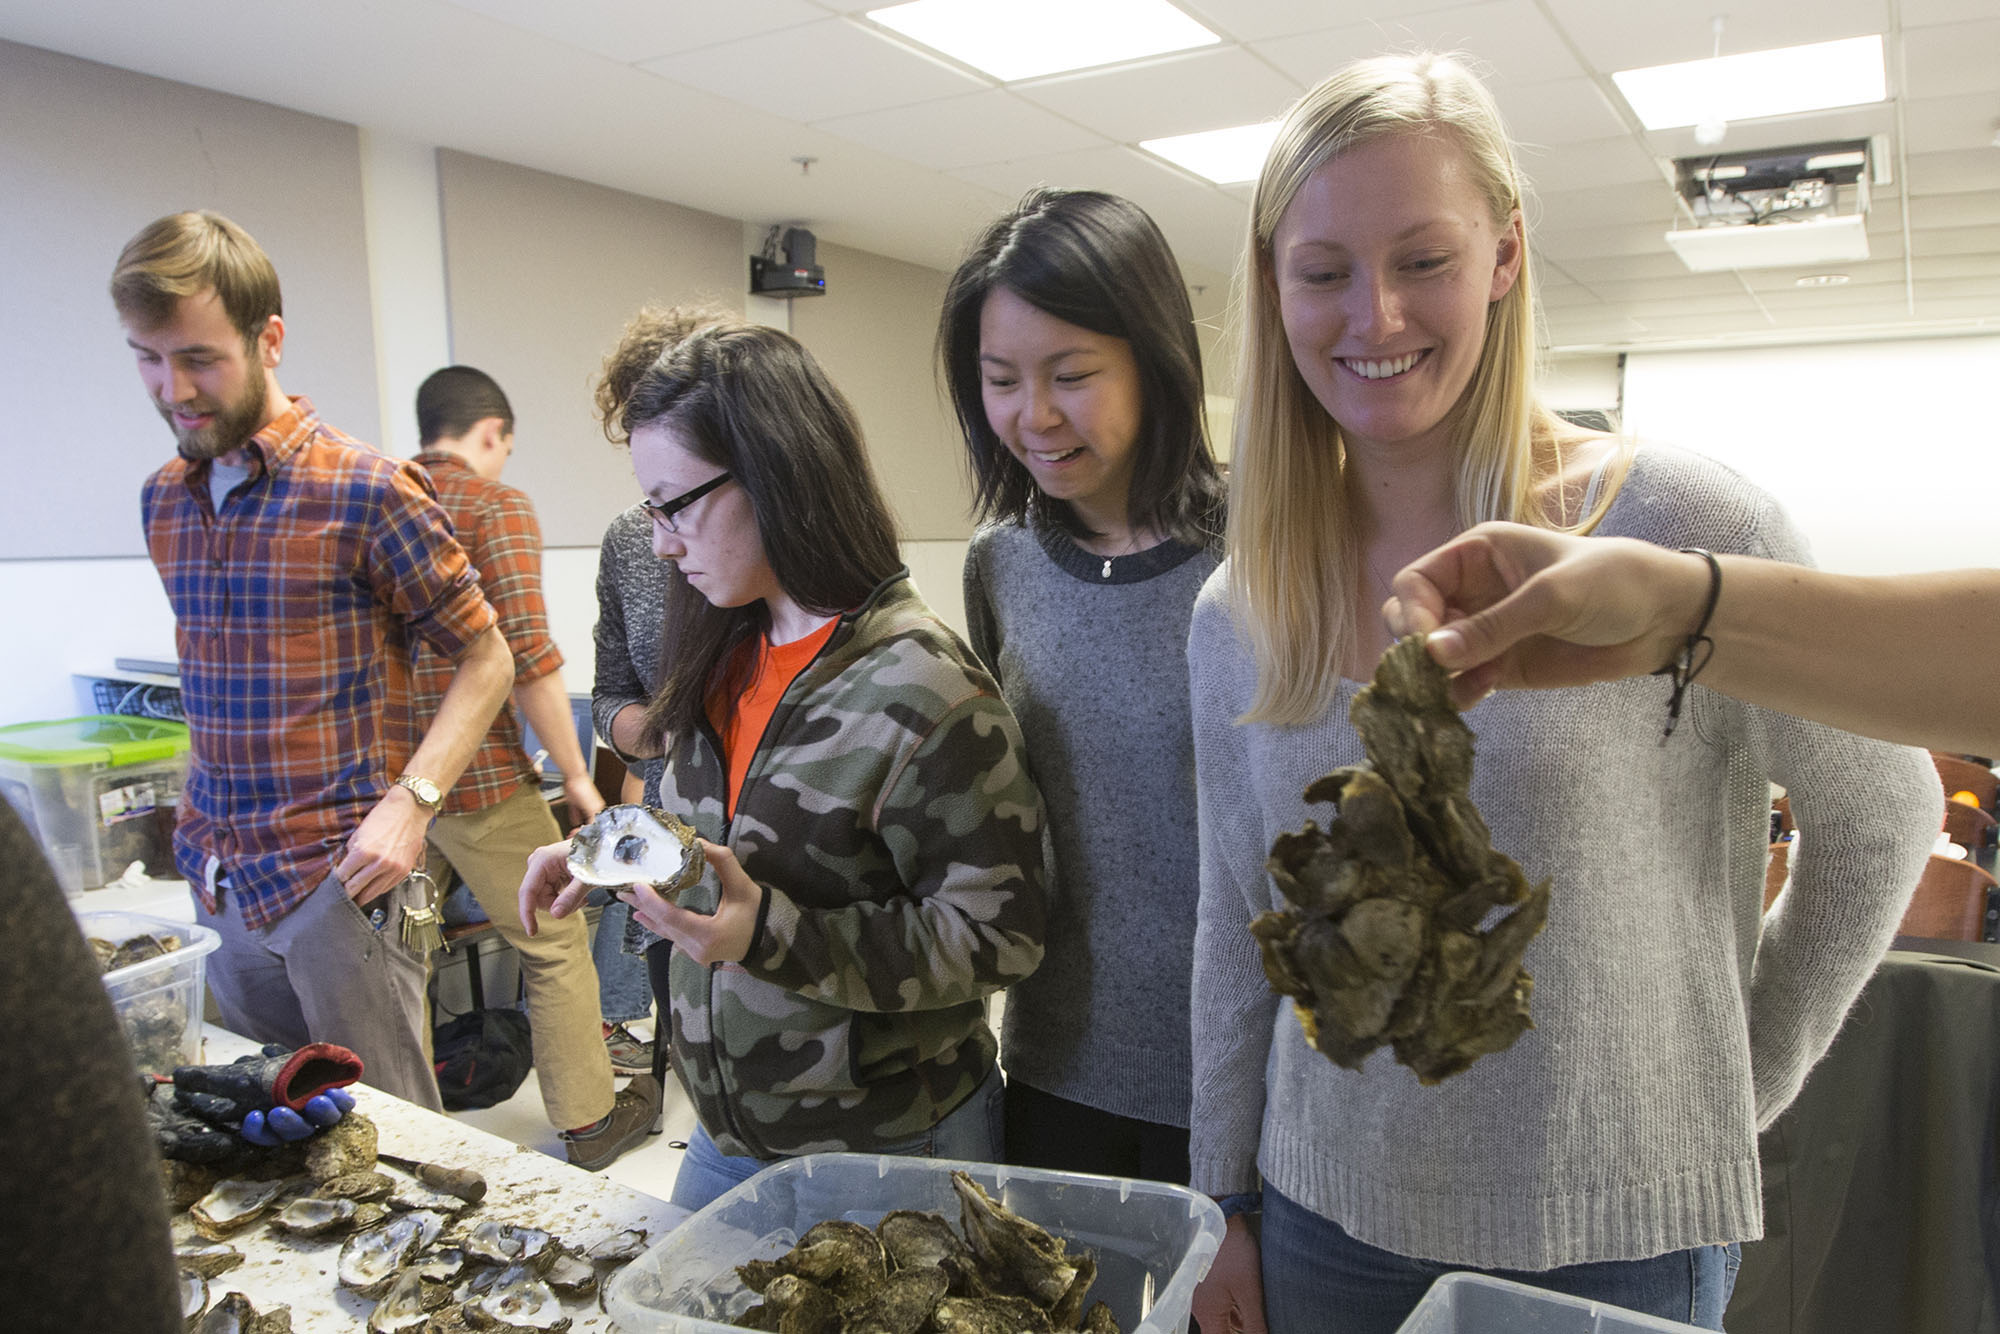 Students Nathan Rose, Kristen Eppard, Abigail Chan and Mary Collins take a look at some aquacultured oysters, brought to Stephen Macko’s fisheries class.